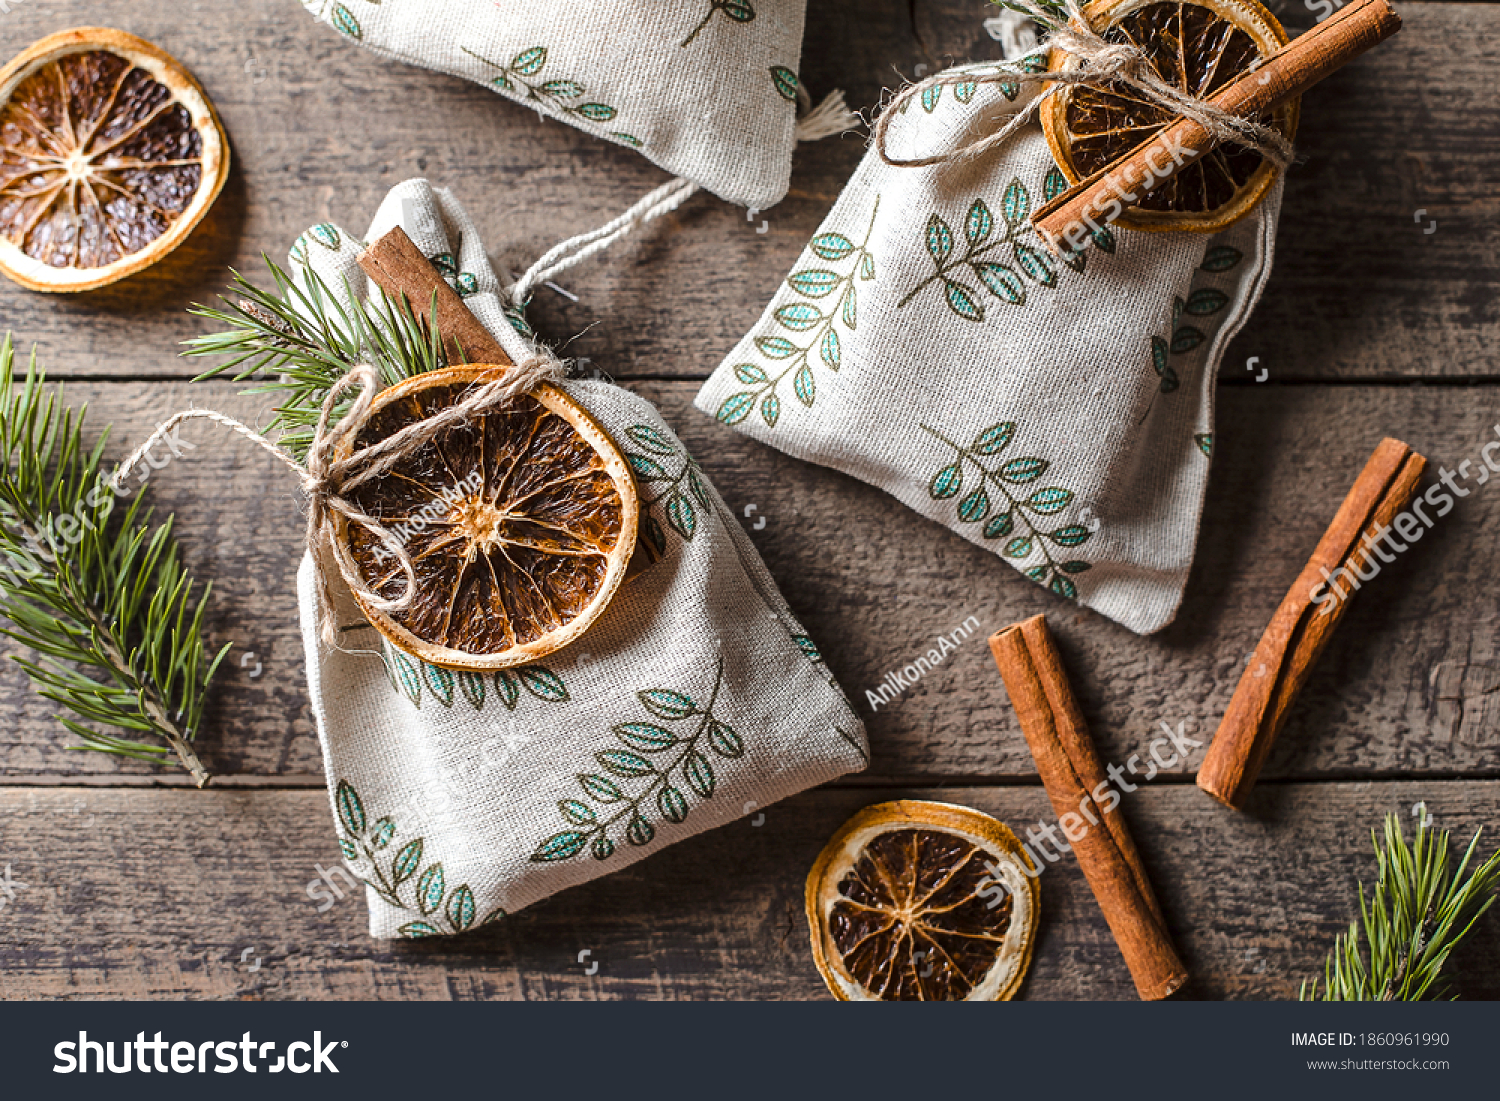 Christmas still life with eco friendly textile gift packaging. Fabric gift pouches decorated by fir tree, dry citrus and cinnamon stick's. #1860961990